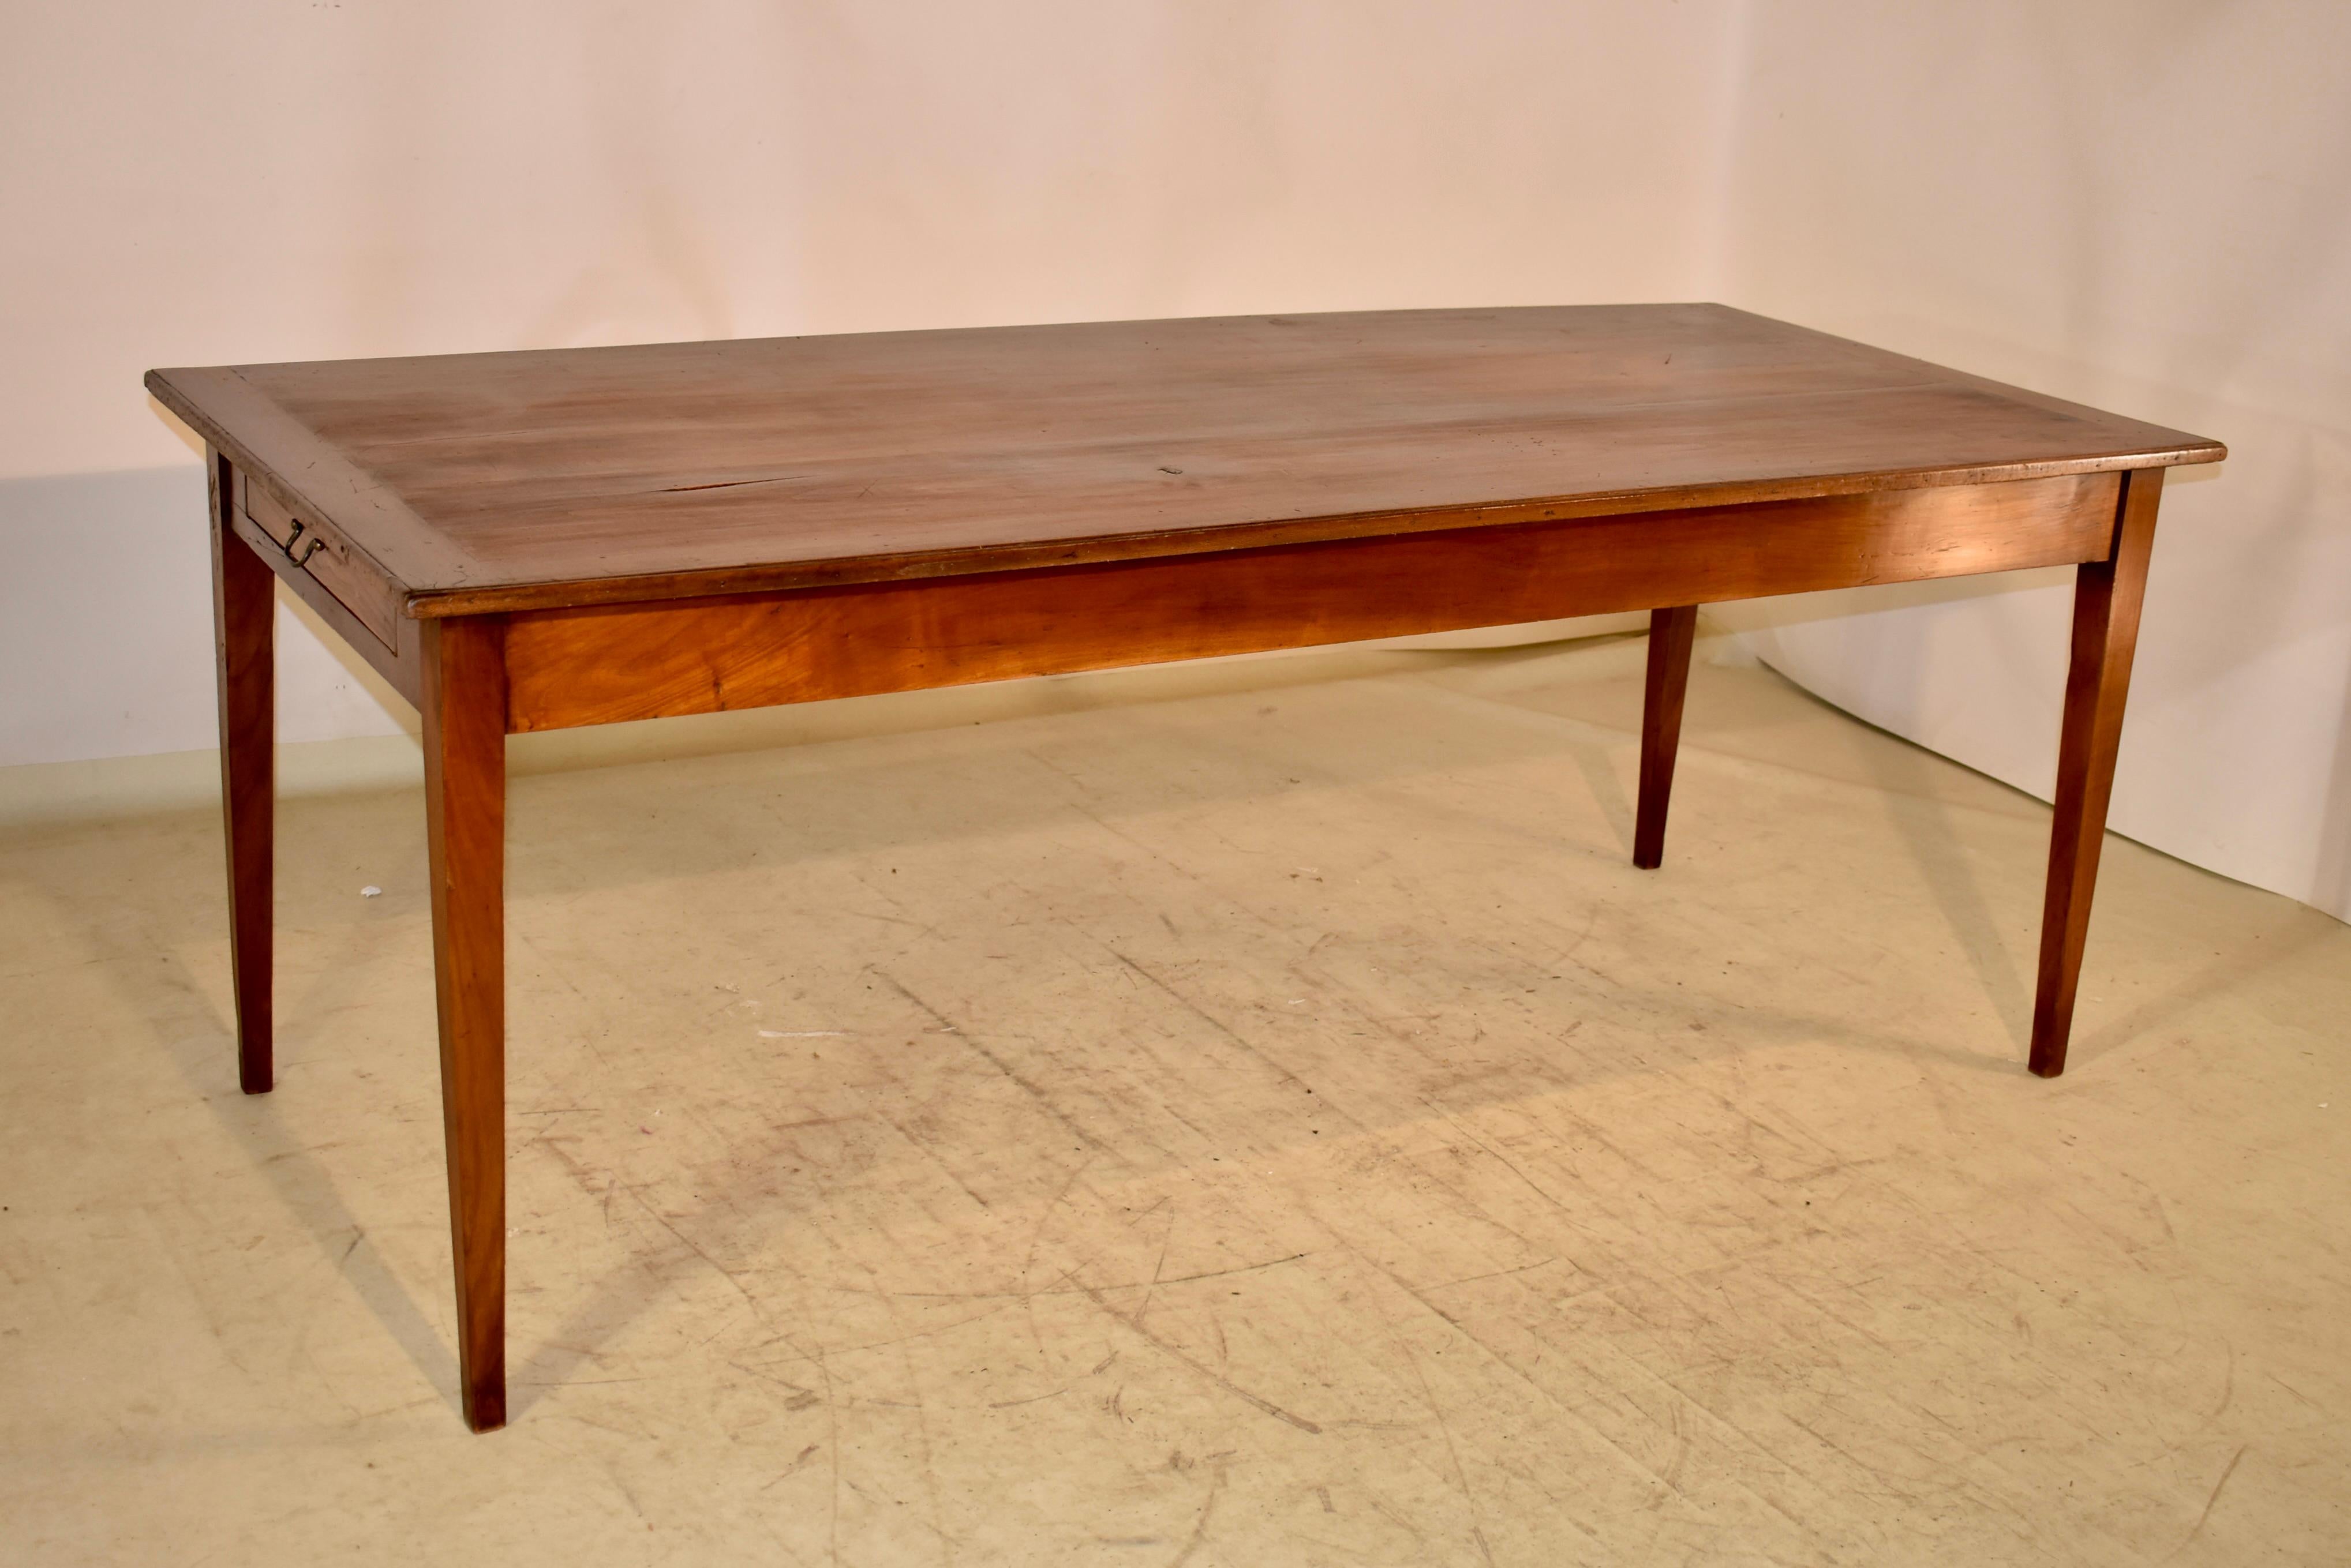 French 19th Century Chestnut Farm Table from France